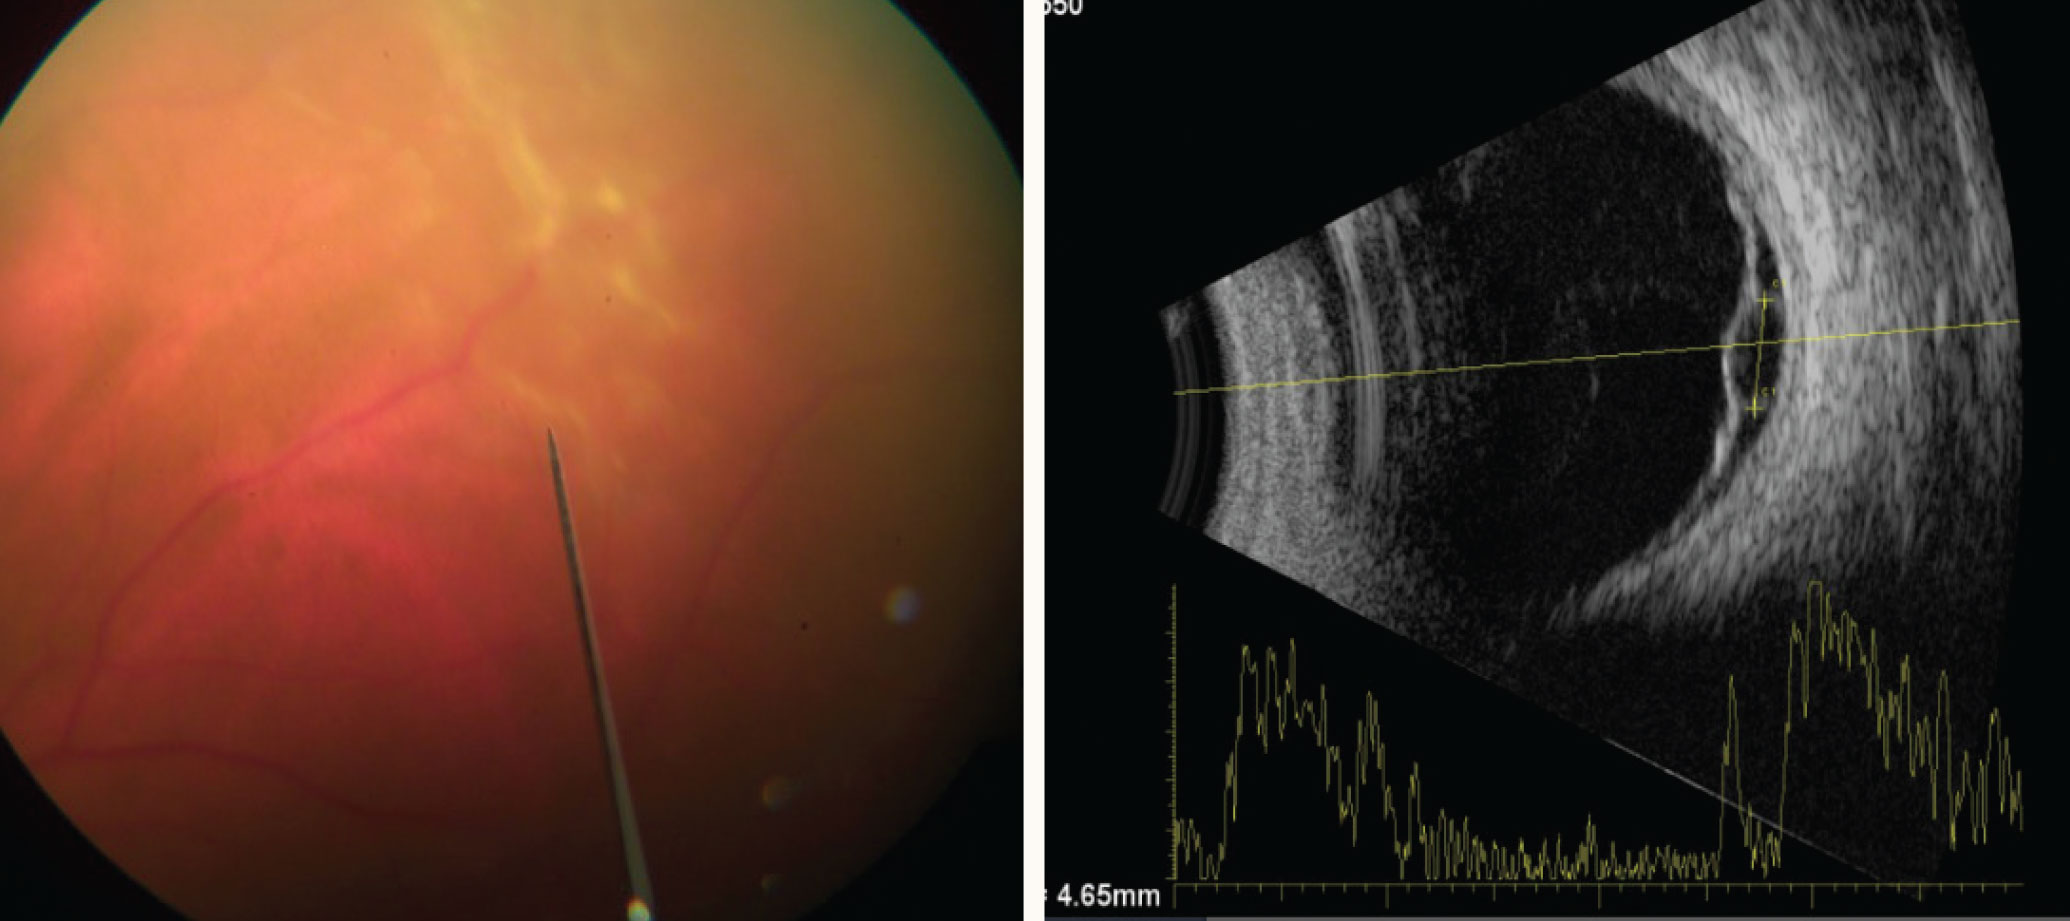 Retinal detachment in a patient with a solitary tubercular granuloma (left) on B-scan ultrasonography (right).